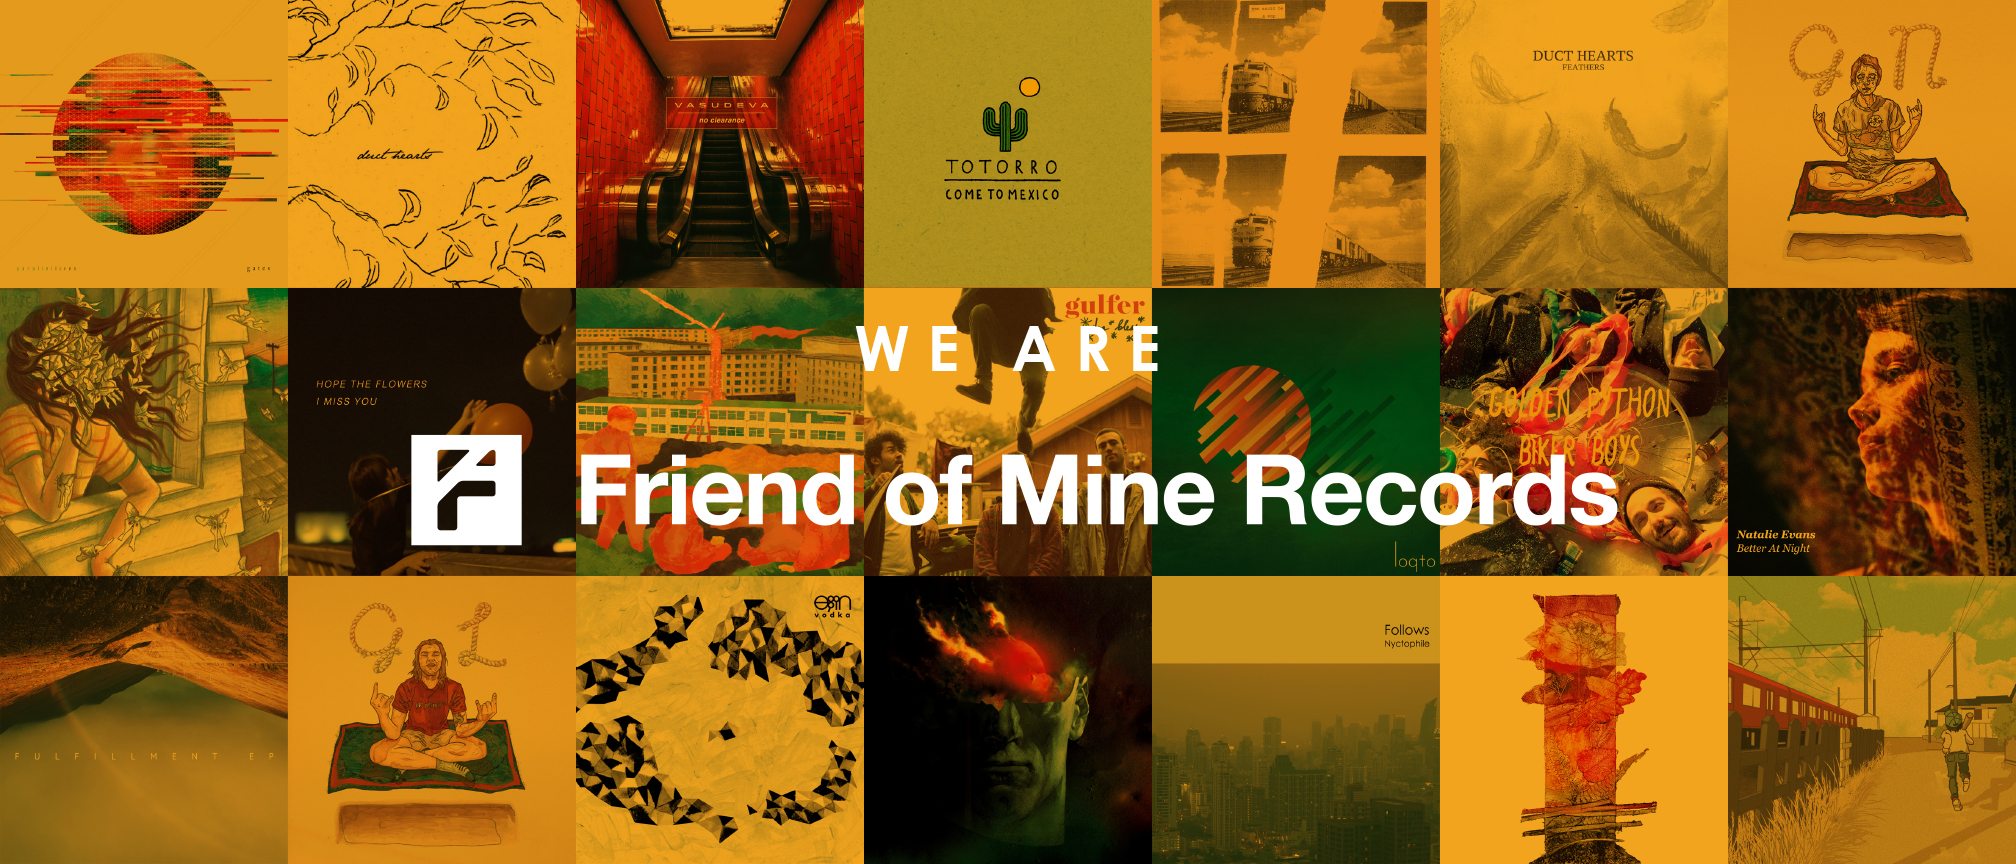 WE ARE Friend of Mine Records